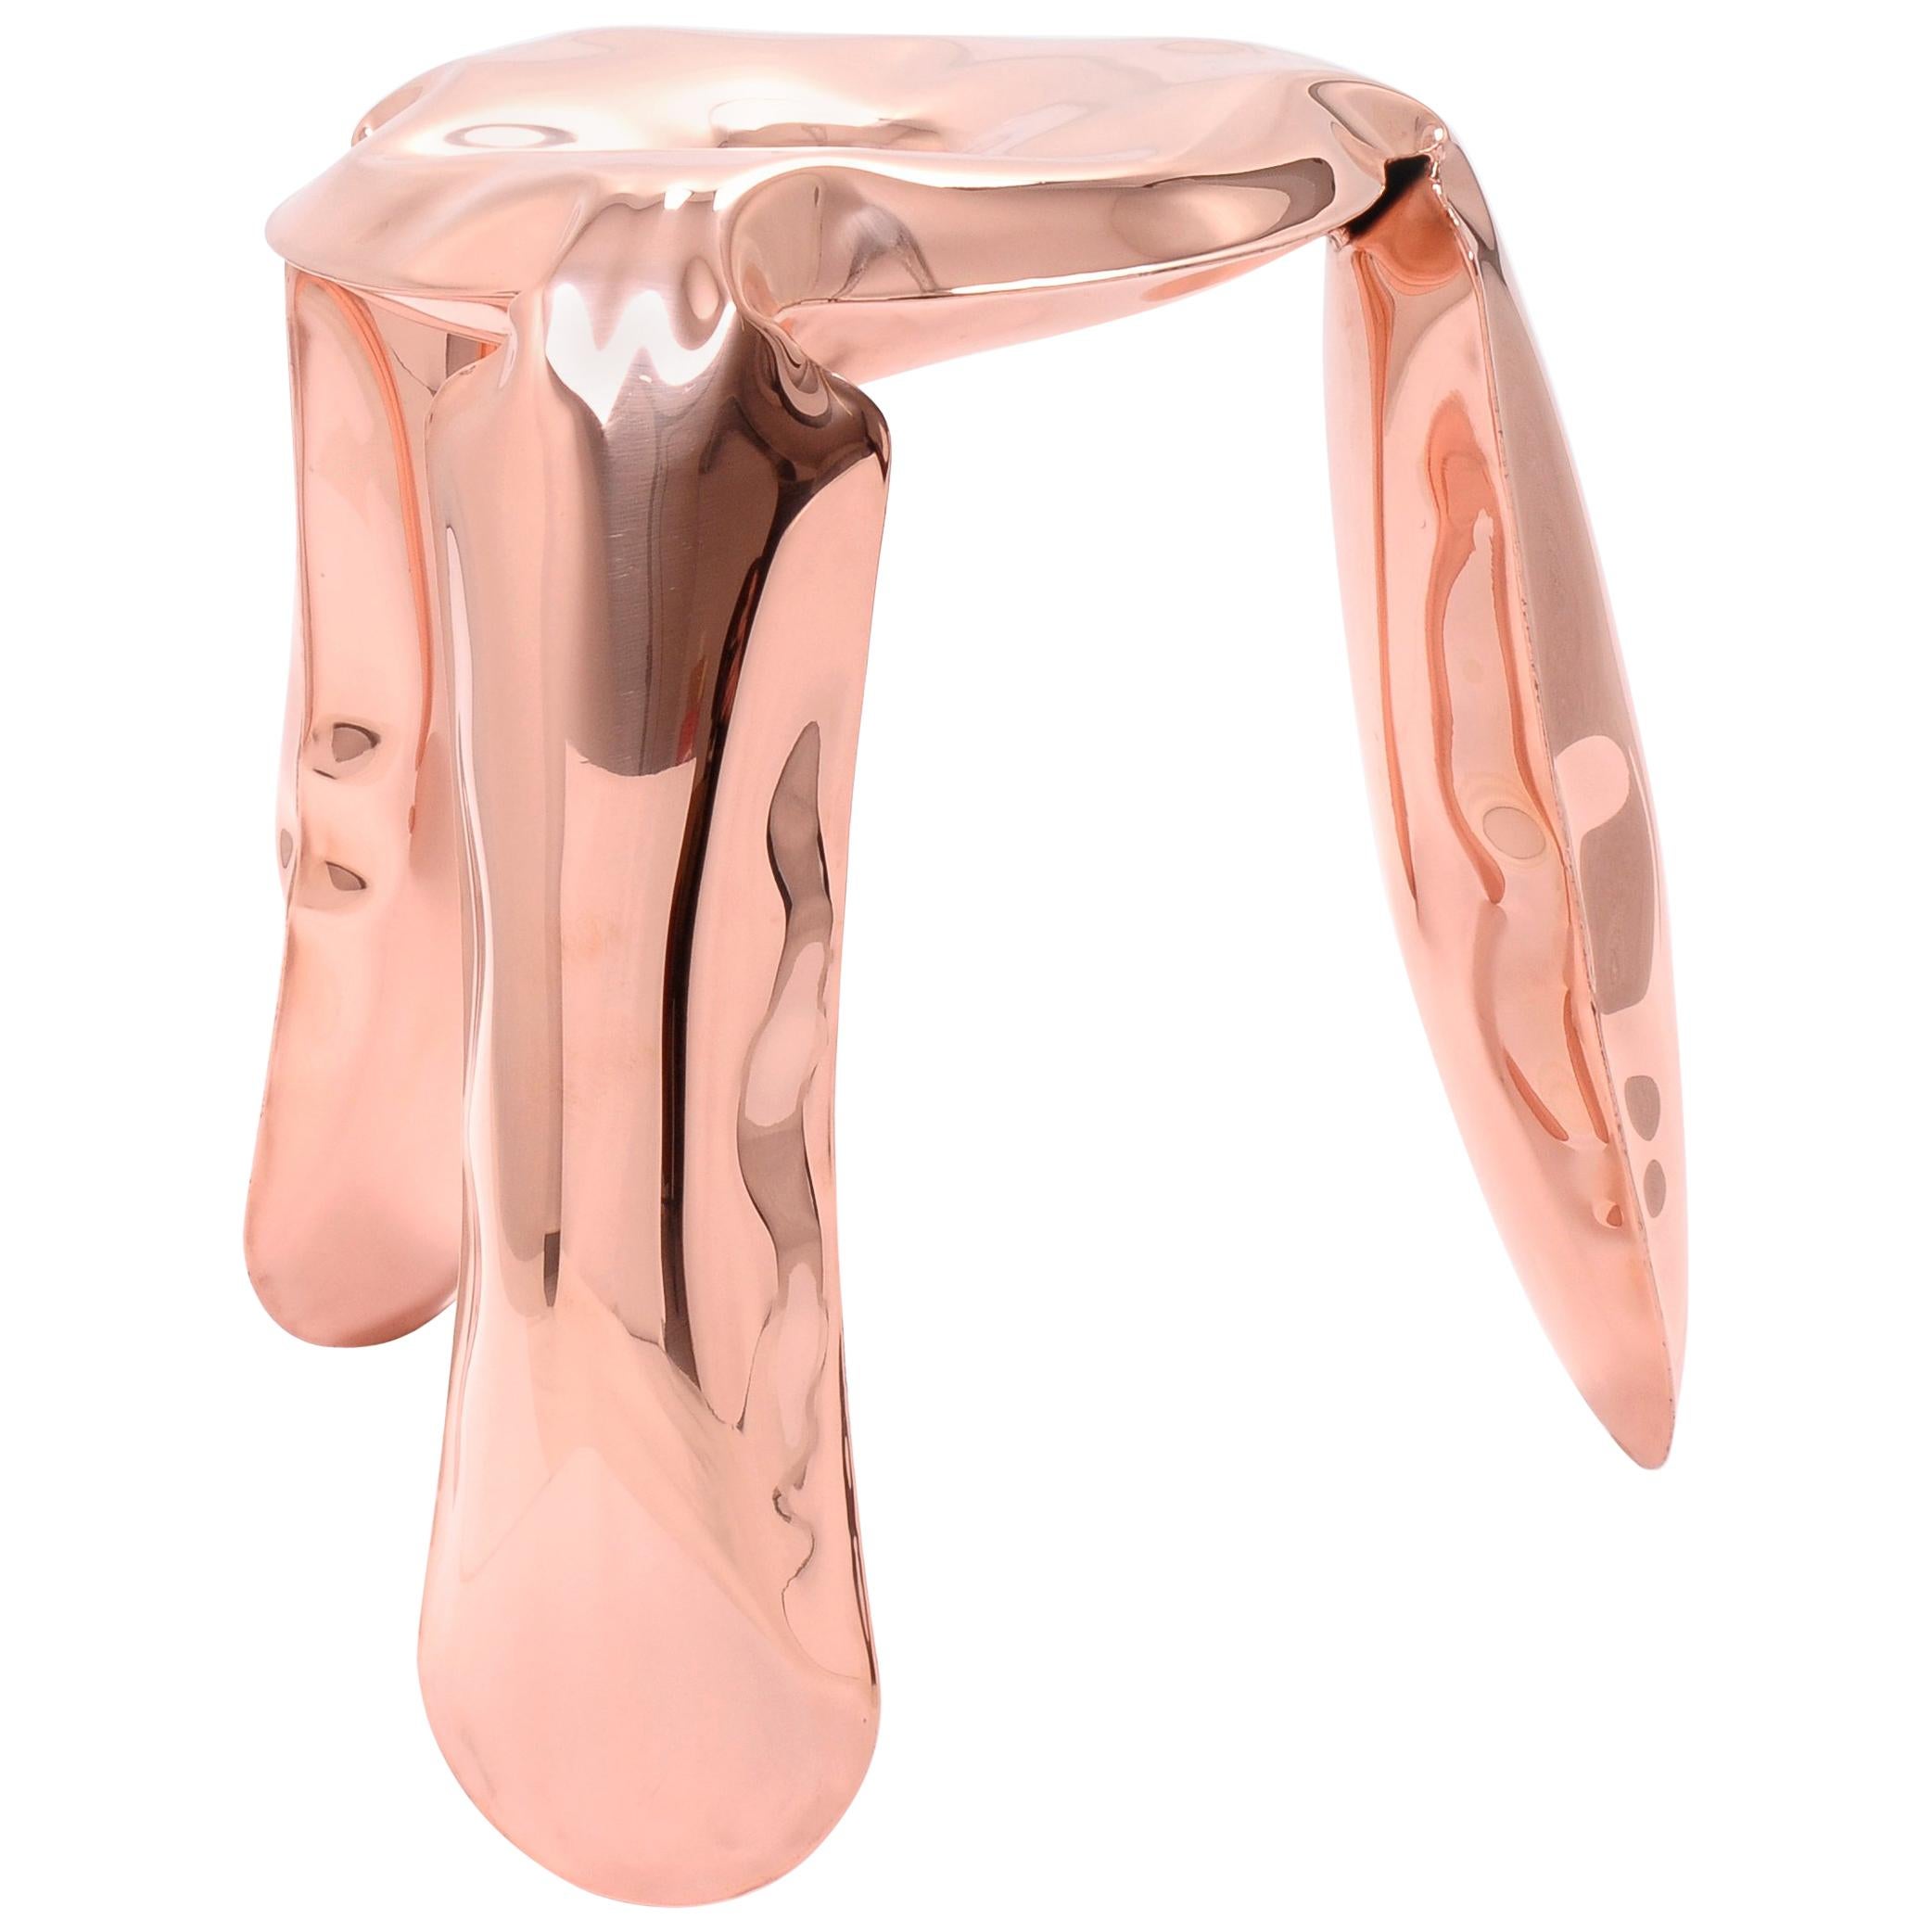 Limited Edition Plopp Mini Stool in Polished Copper by Zieta For Sale